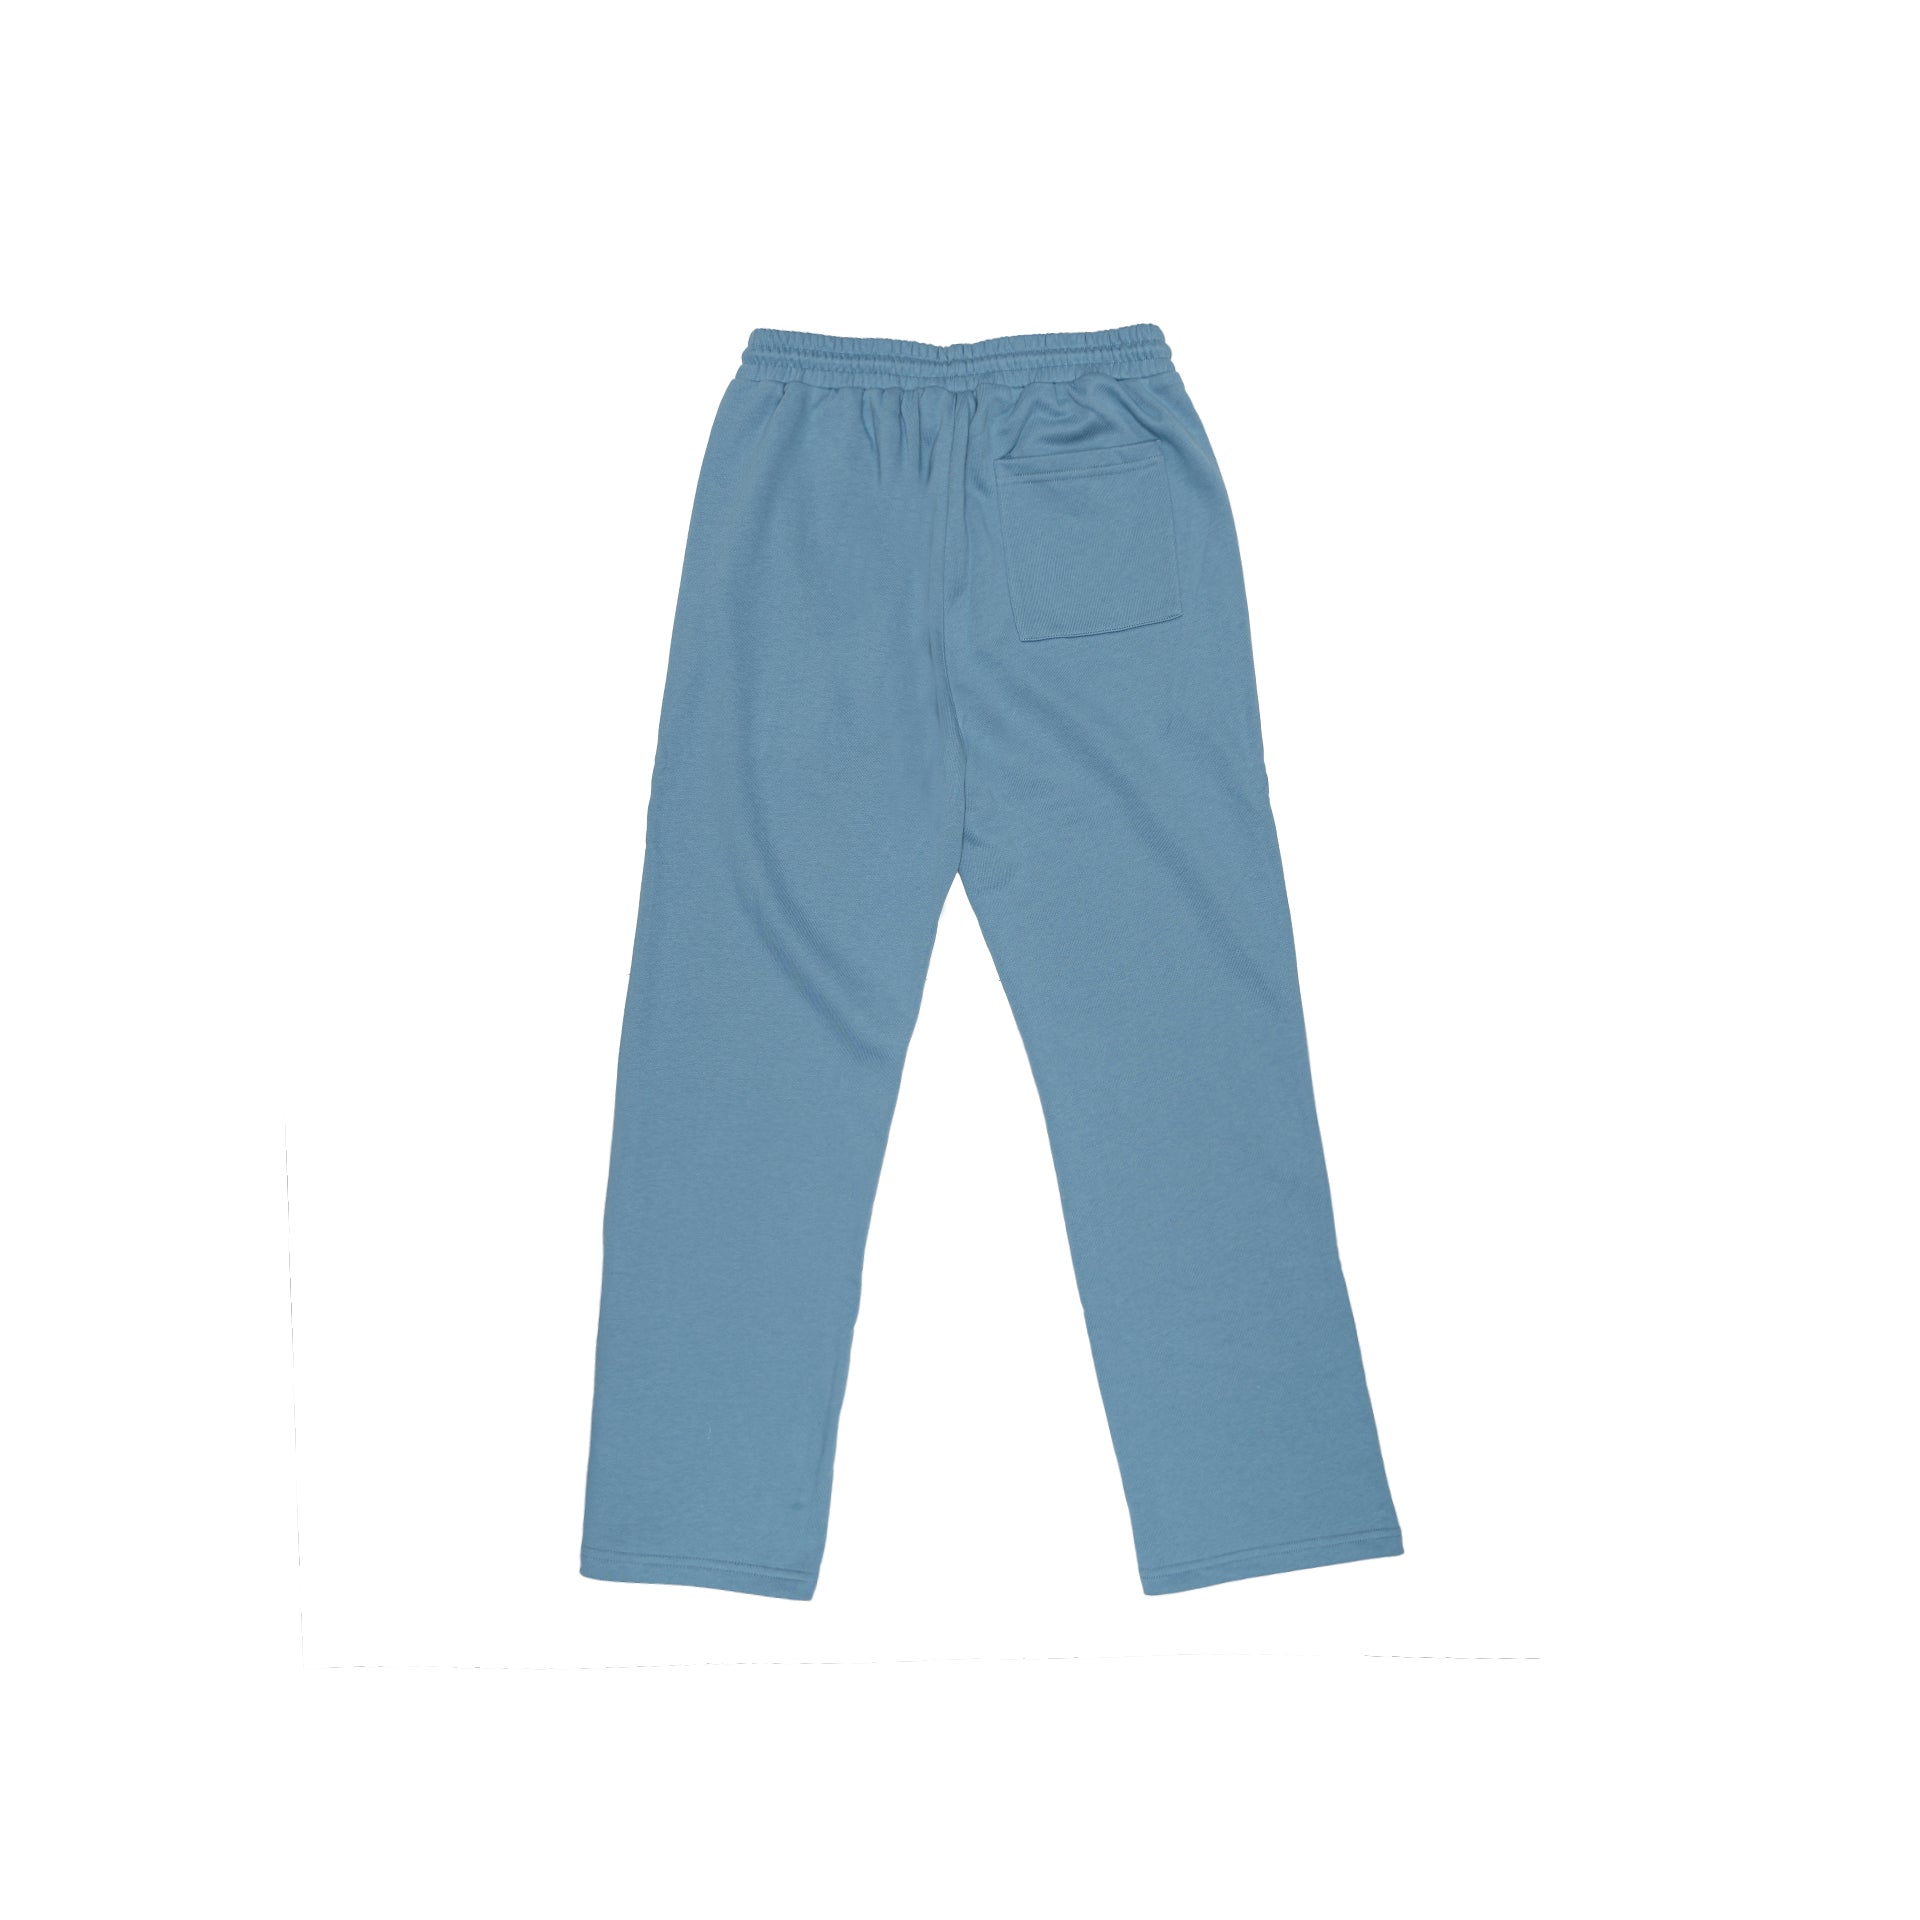 Baby Blue Cotton Sweatpants by Brandtionary